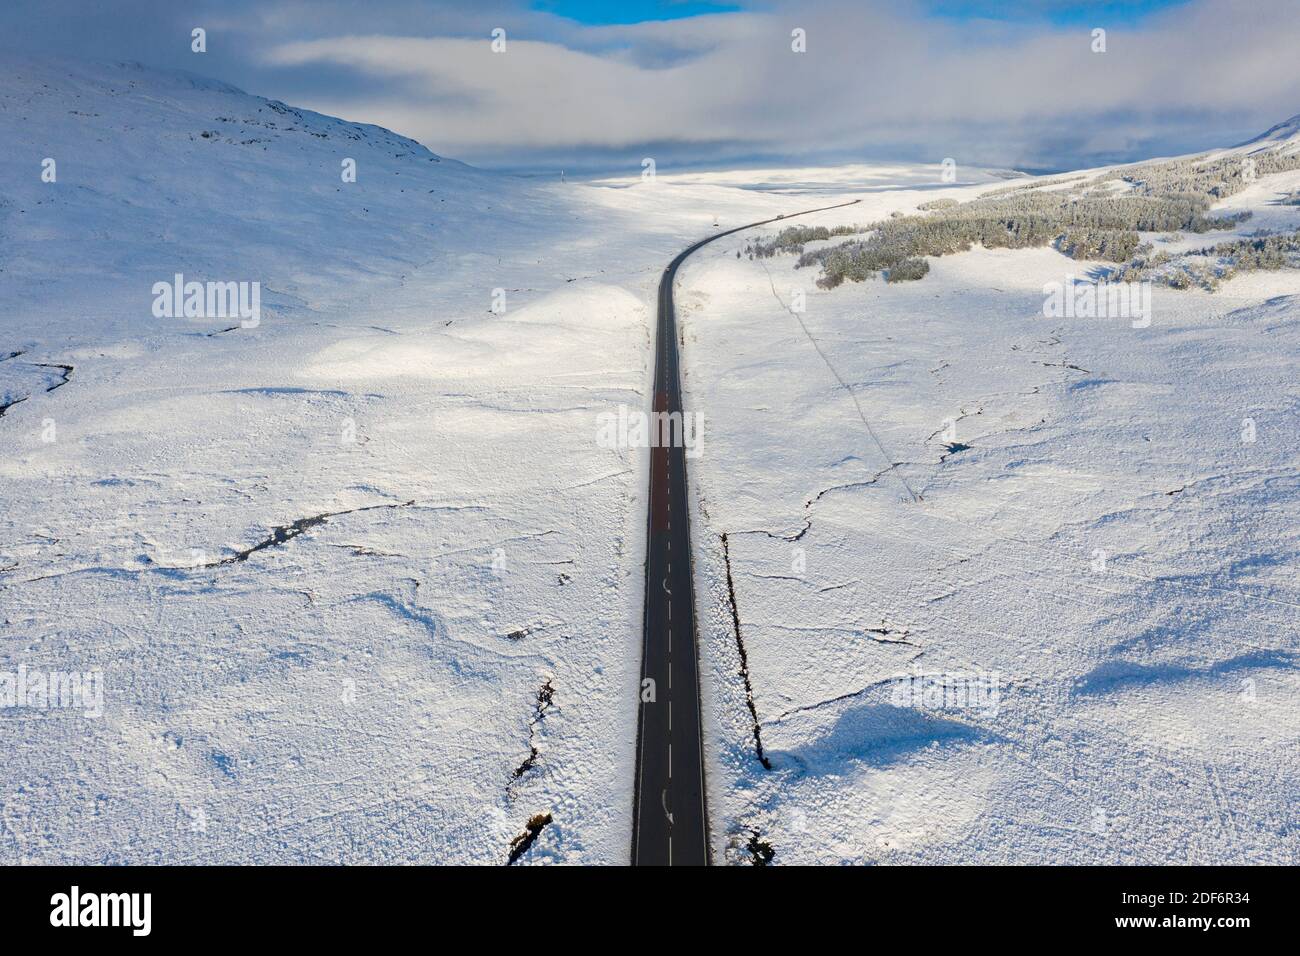 Glen Coe, Scotland, UK. 3 December 2020. A cold front has brought the first snowfall to the Scottish Highlands. Rannoch Moor and Glen Coe are covered in several inches of snow. Bright sunshine throughout the day created beautiful winter landscapes.  Pictured; Aerial view of A82 passing over snow covered Ranch Moor.  Iain Masterton/Alamy Live News Stock Photo